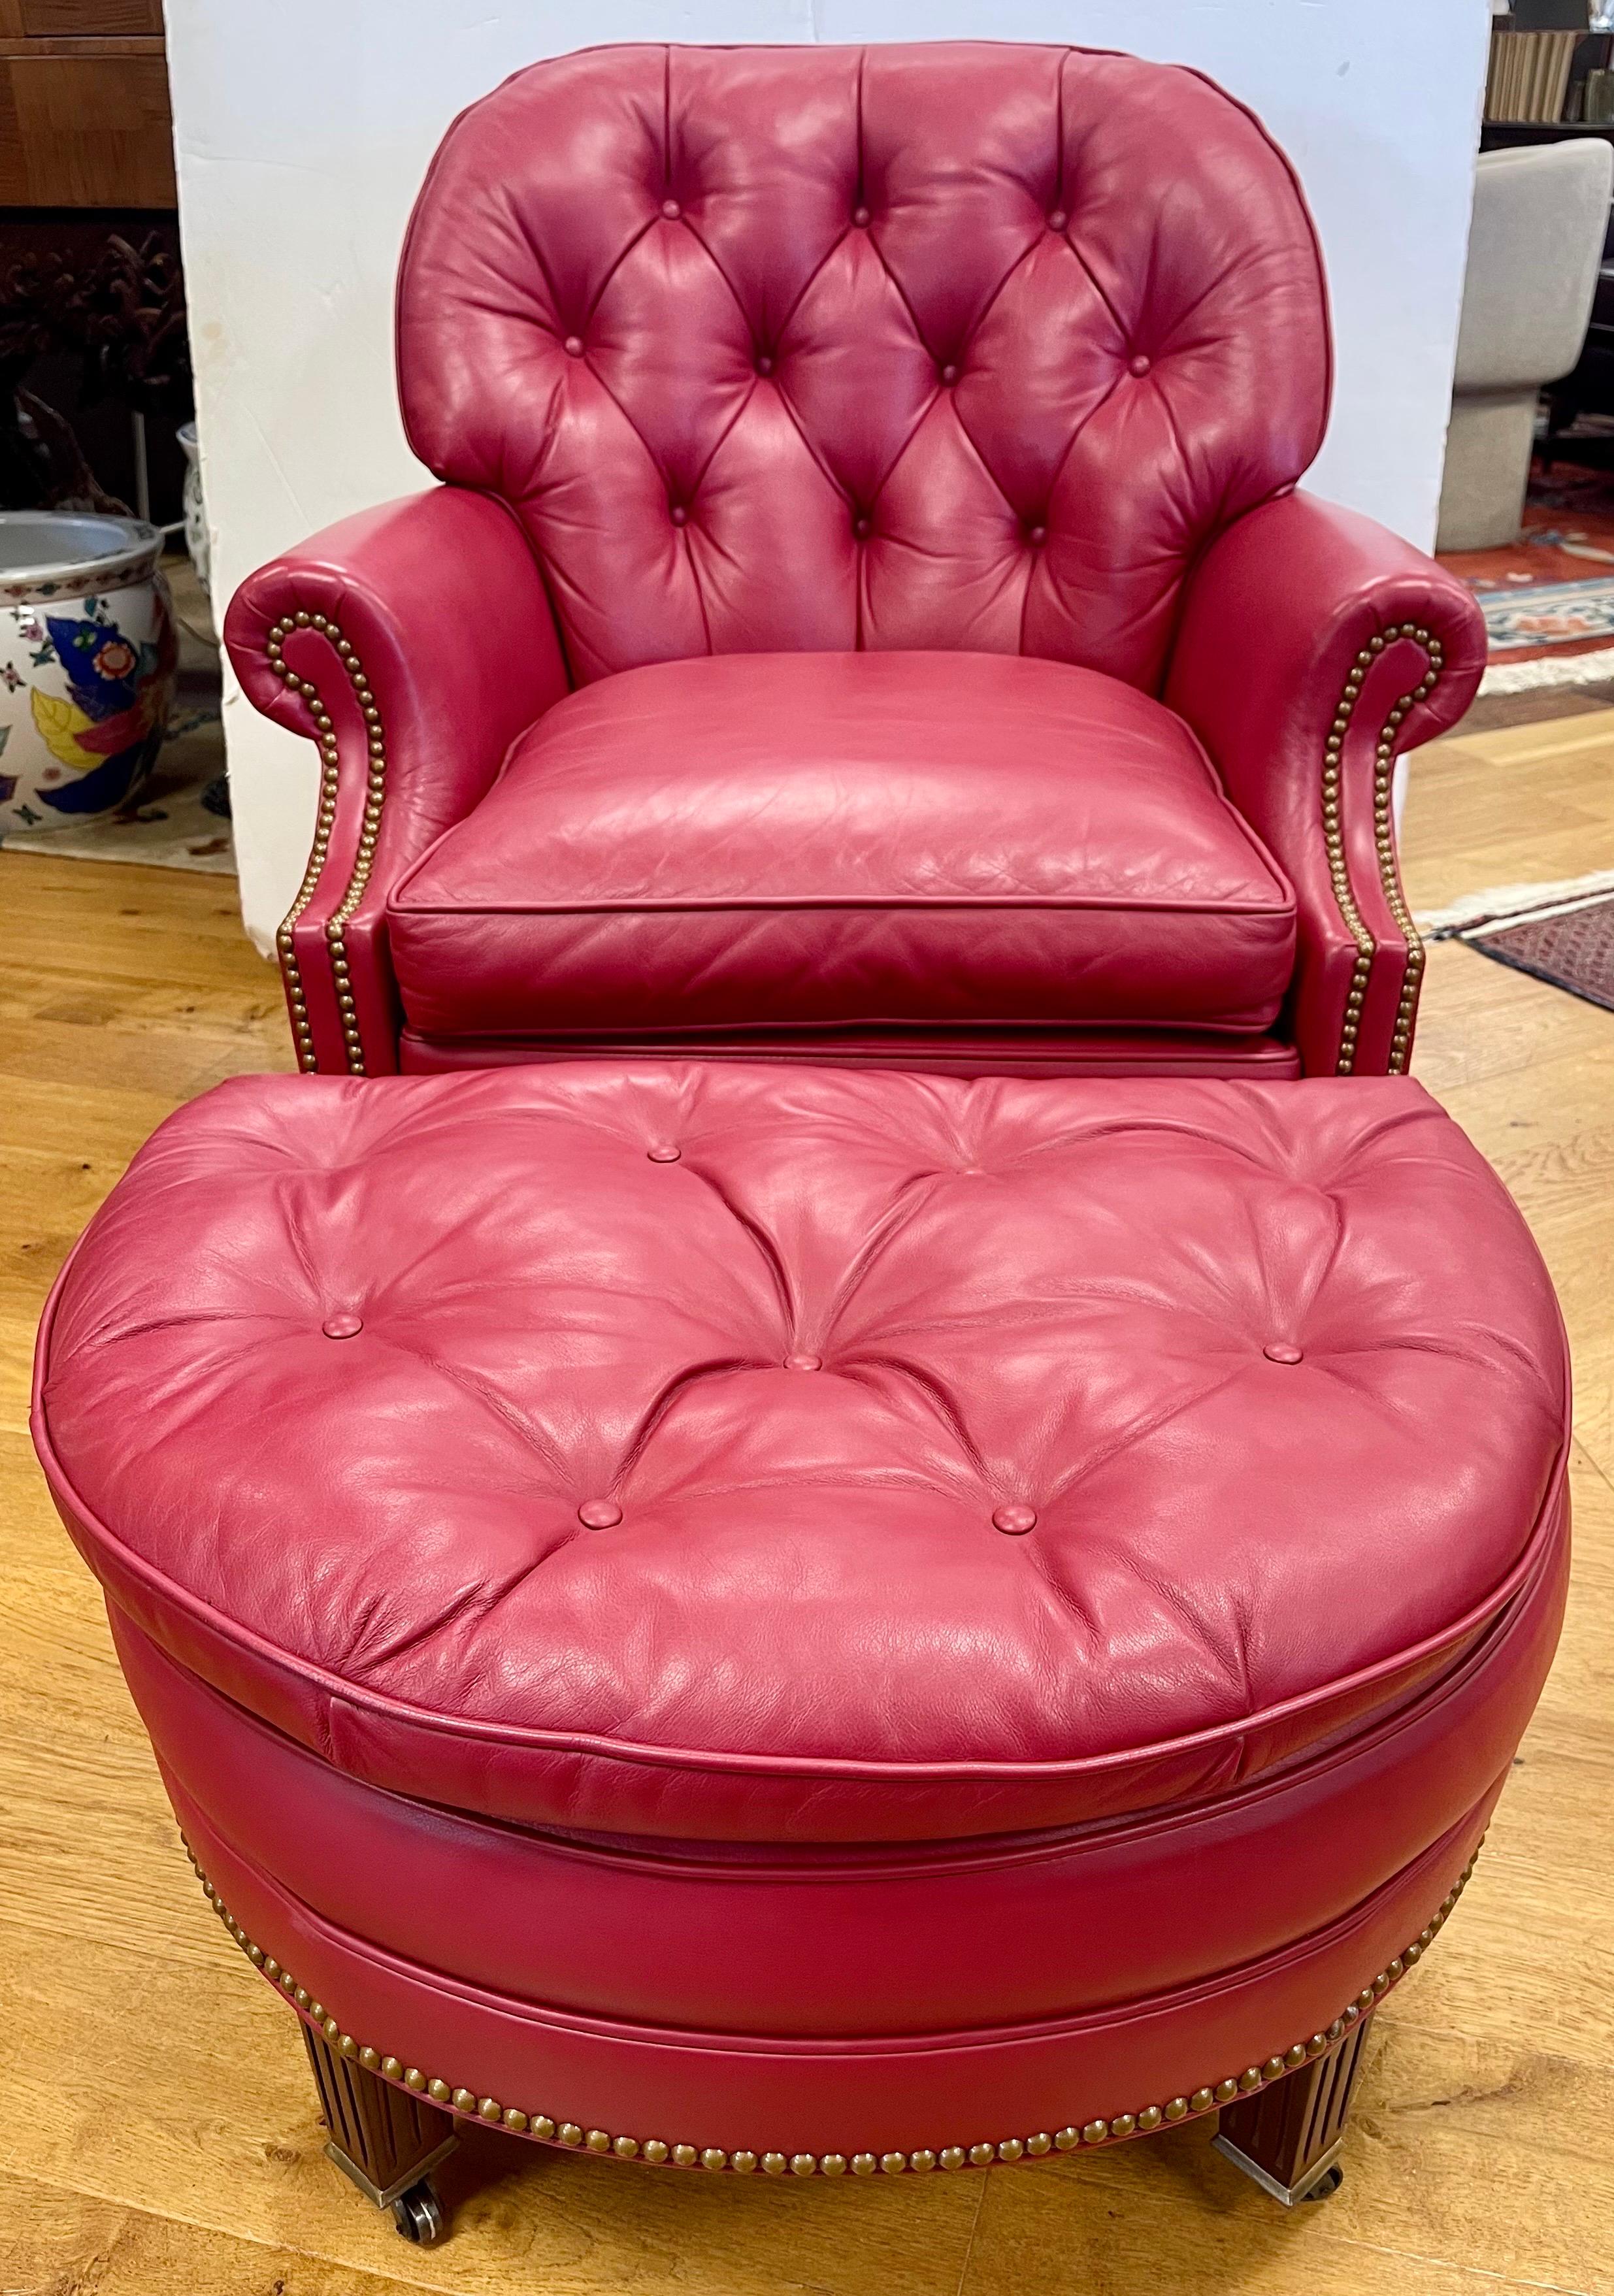 Stunning and coveted Hancock & Moore leather chair and ottoman. The set is labeled underneath. Tufted red raspberry leather with brass tacked detail. Mahogany wood legs with caster wheels for ease of movement. Ottoman in demi-lune shape. Dimensions: